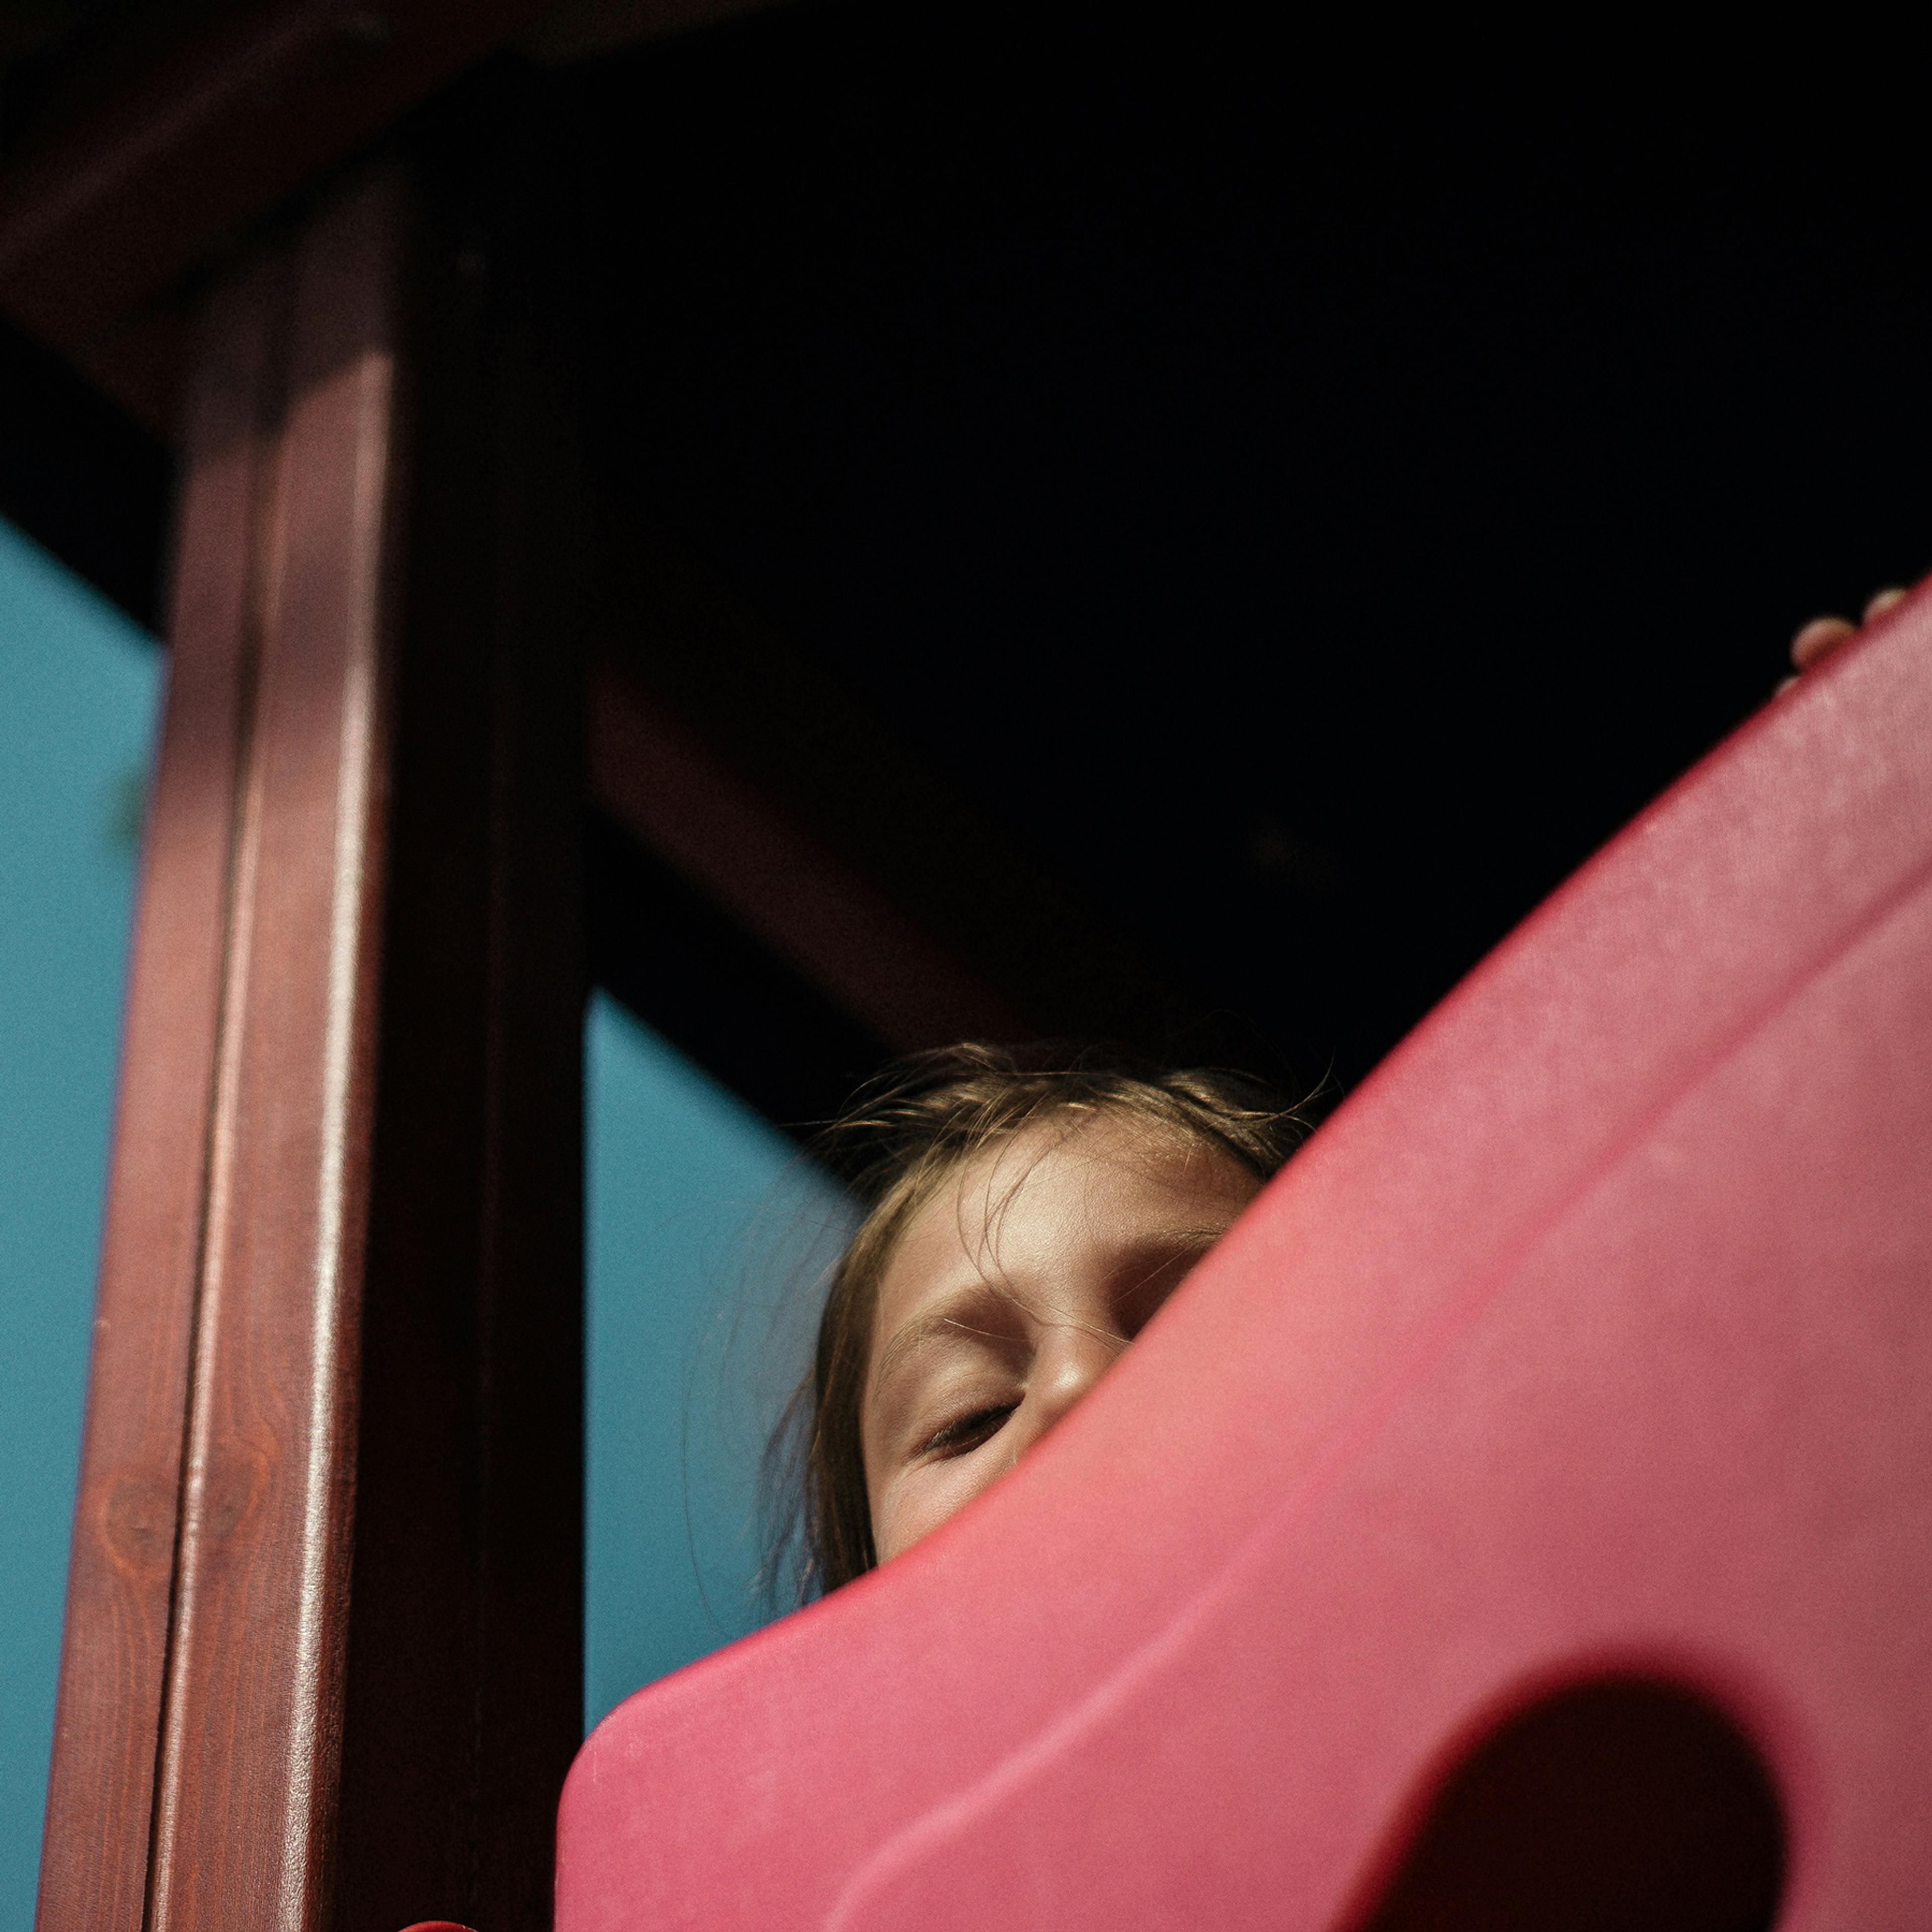 a frightened child whose face is partially obscured peers down from by a play area structure